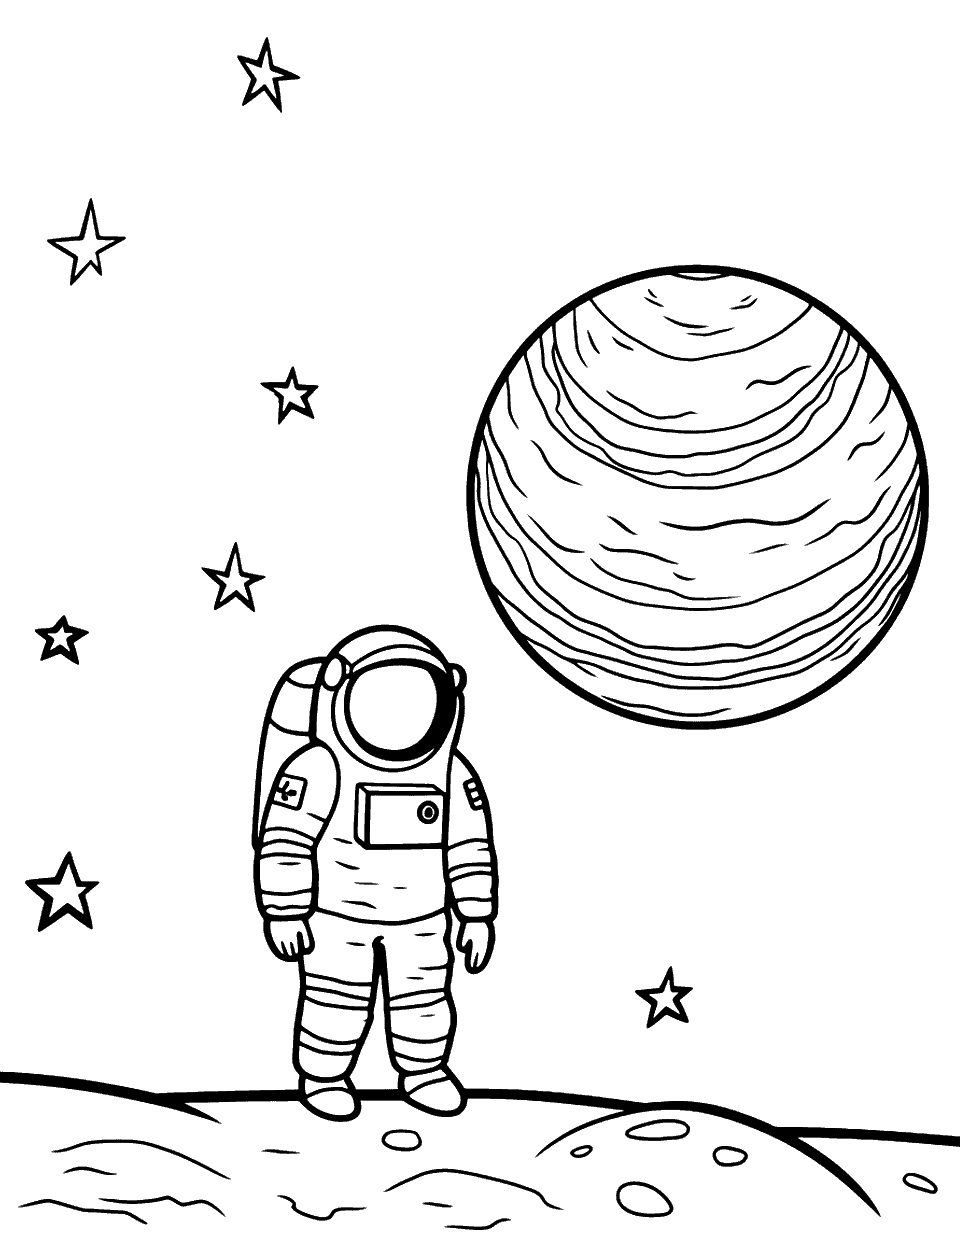 Astronaut Landing Scene Solar System Coloring Page - Scene of an astronaut that just landed on a planet.